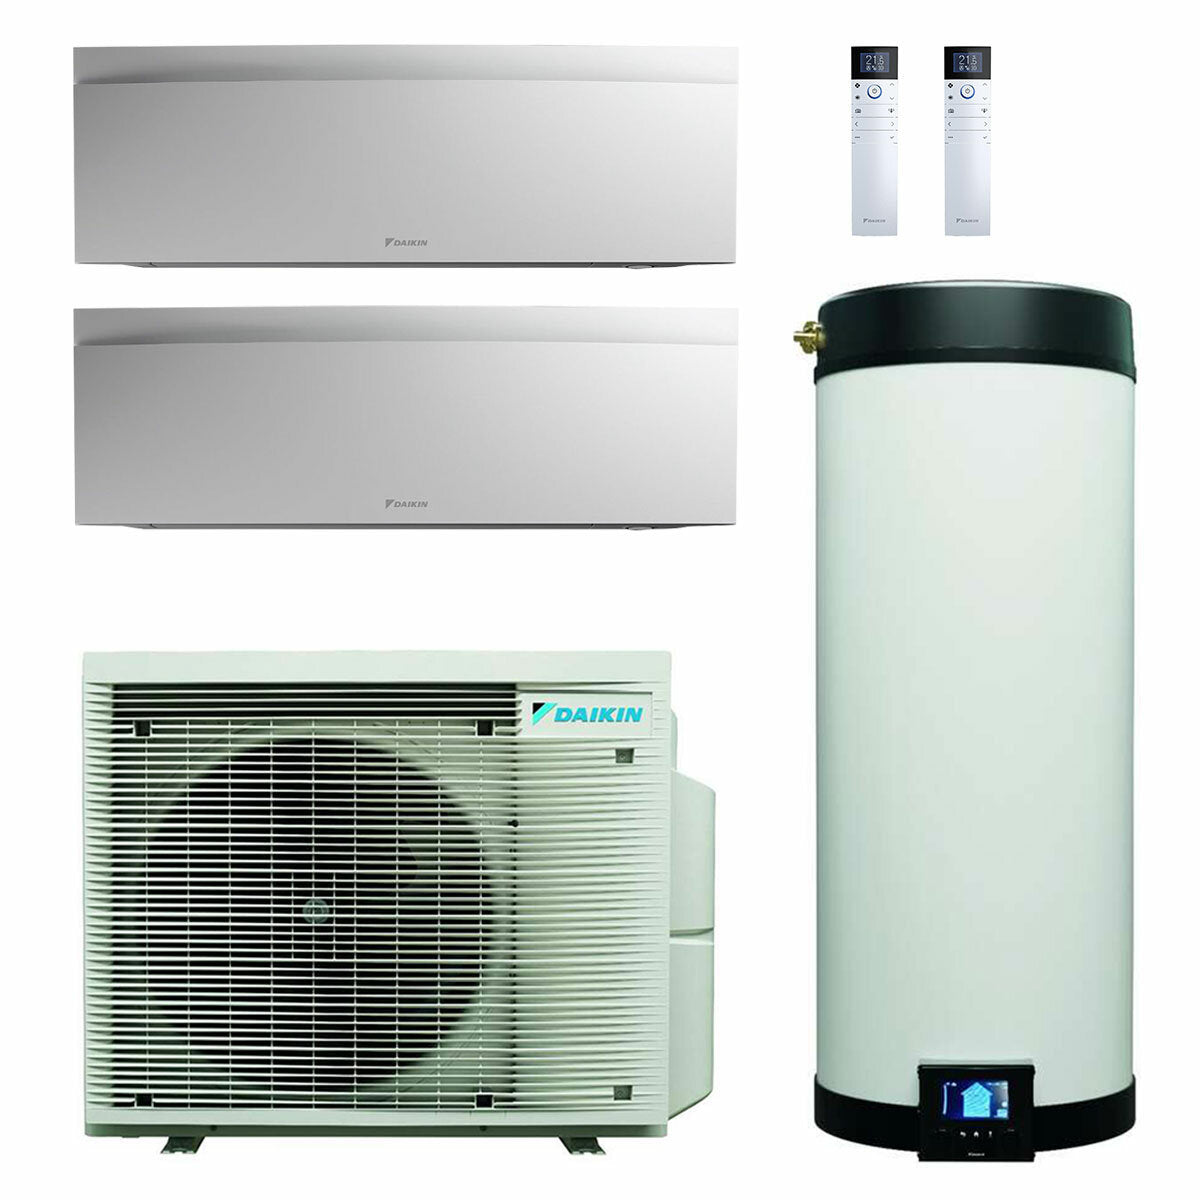 Daikin Multi+ dual split air conditioning system and domestic hot water - Indoor units Emura 3 white 9000+9000 BTU - Tank 120 l